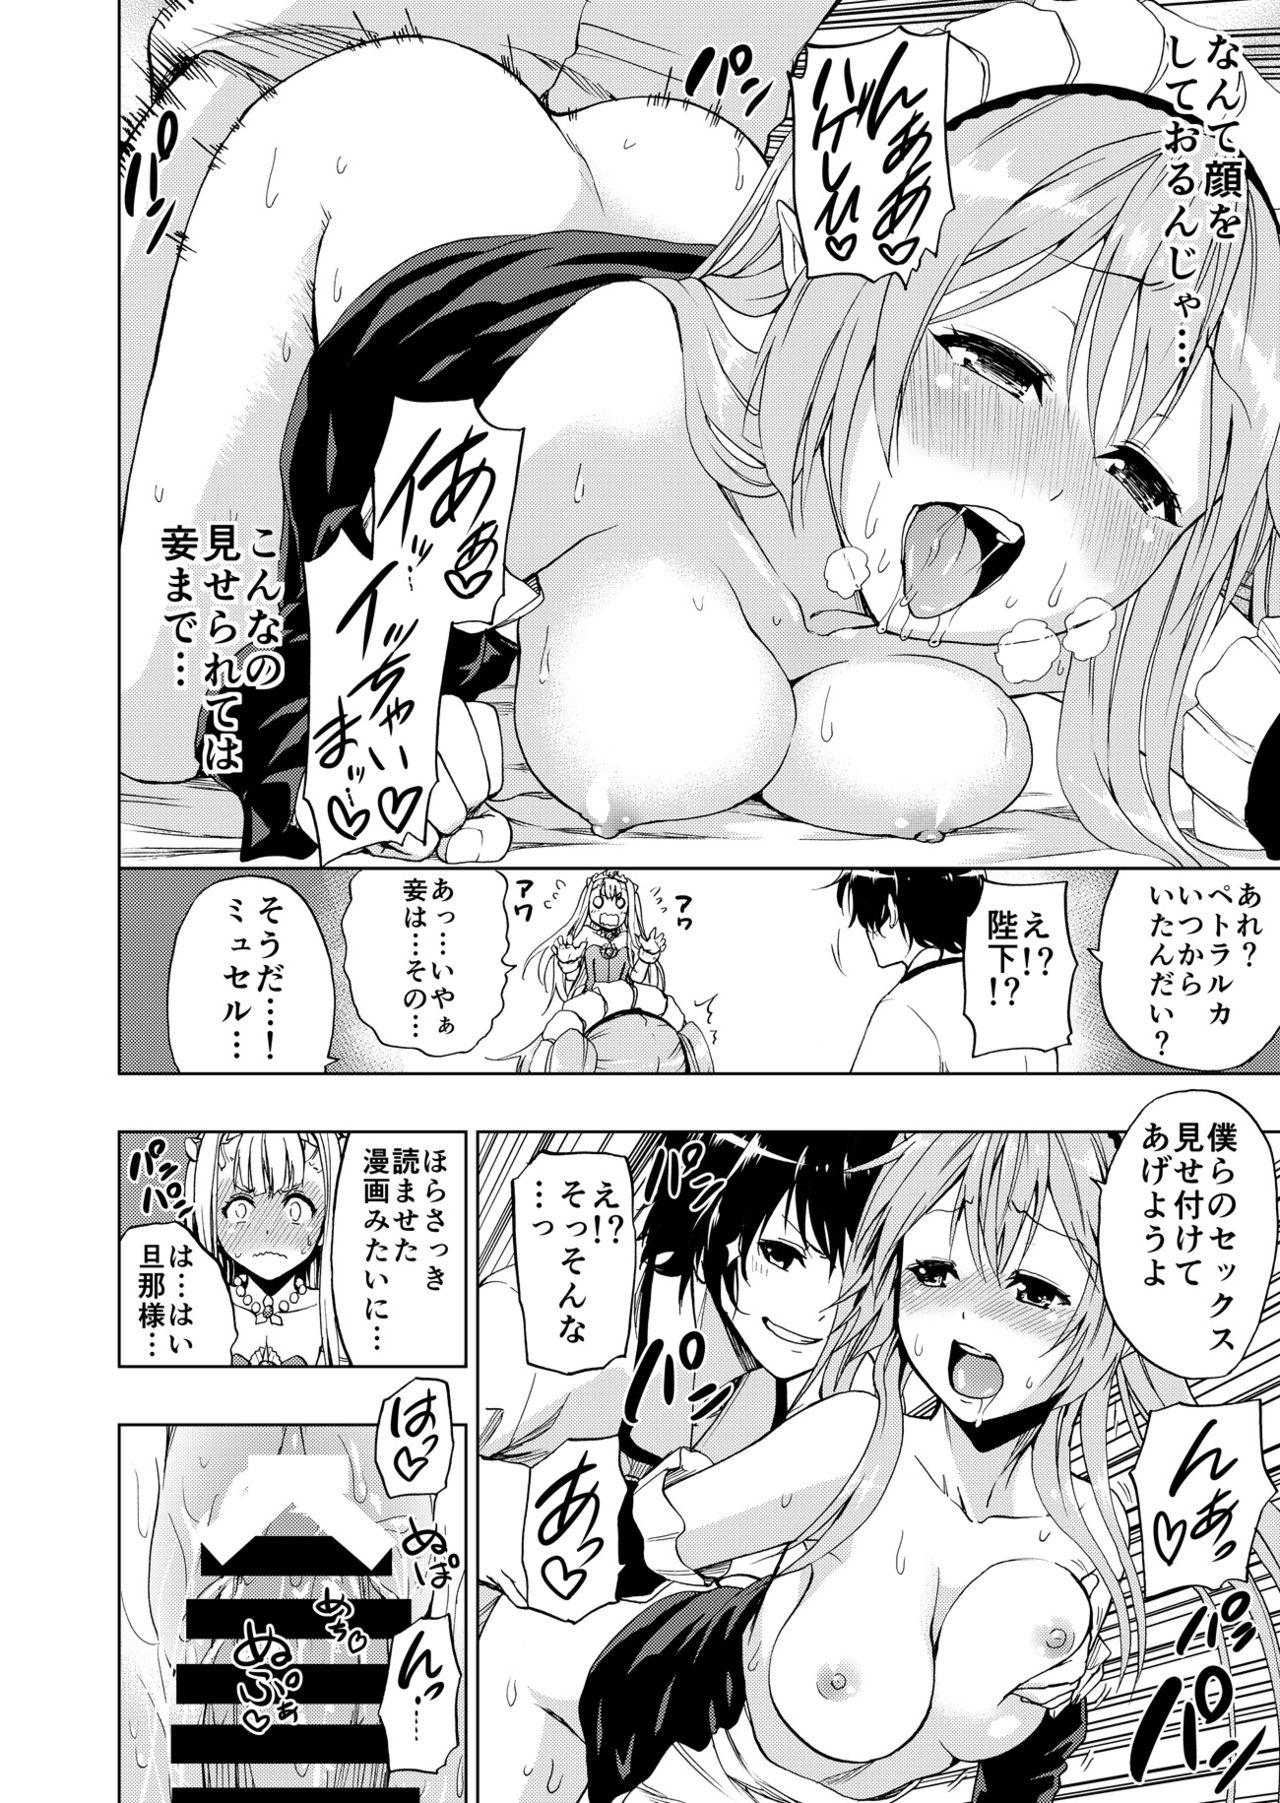 Whipping Outbreak Harem - Outbreak company Celebrities - Page 11